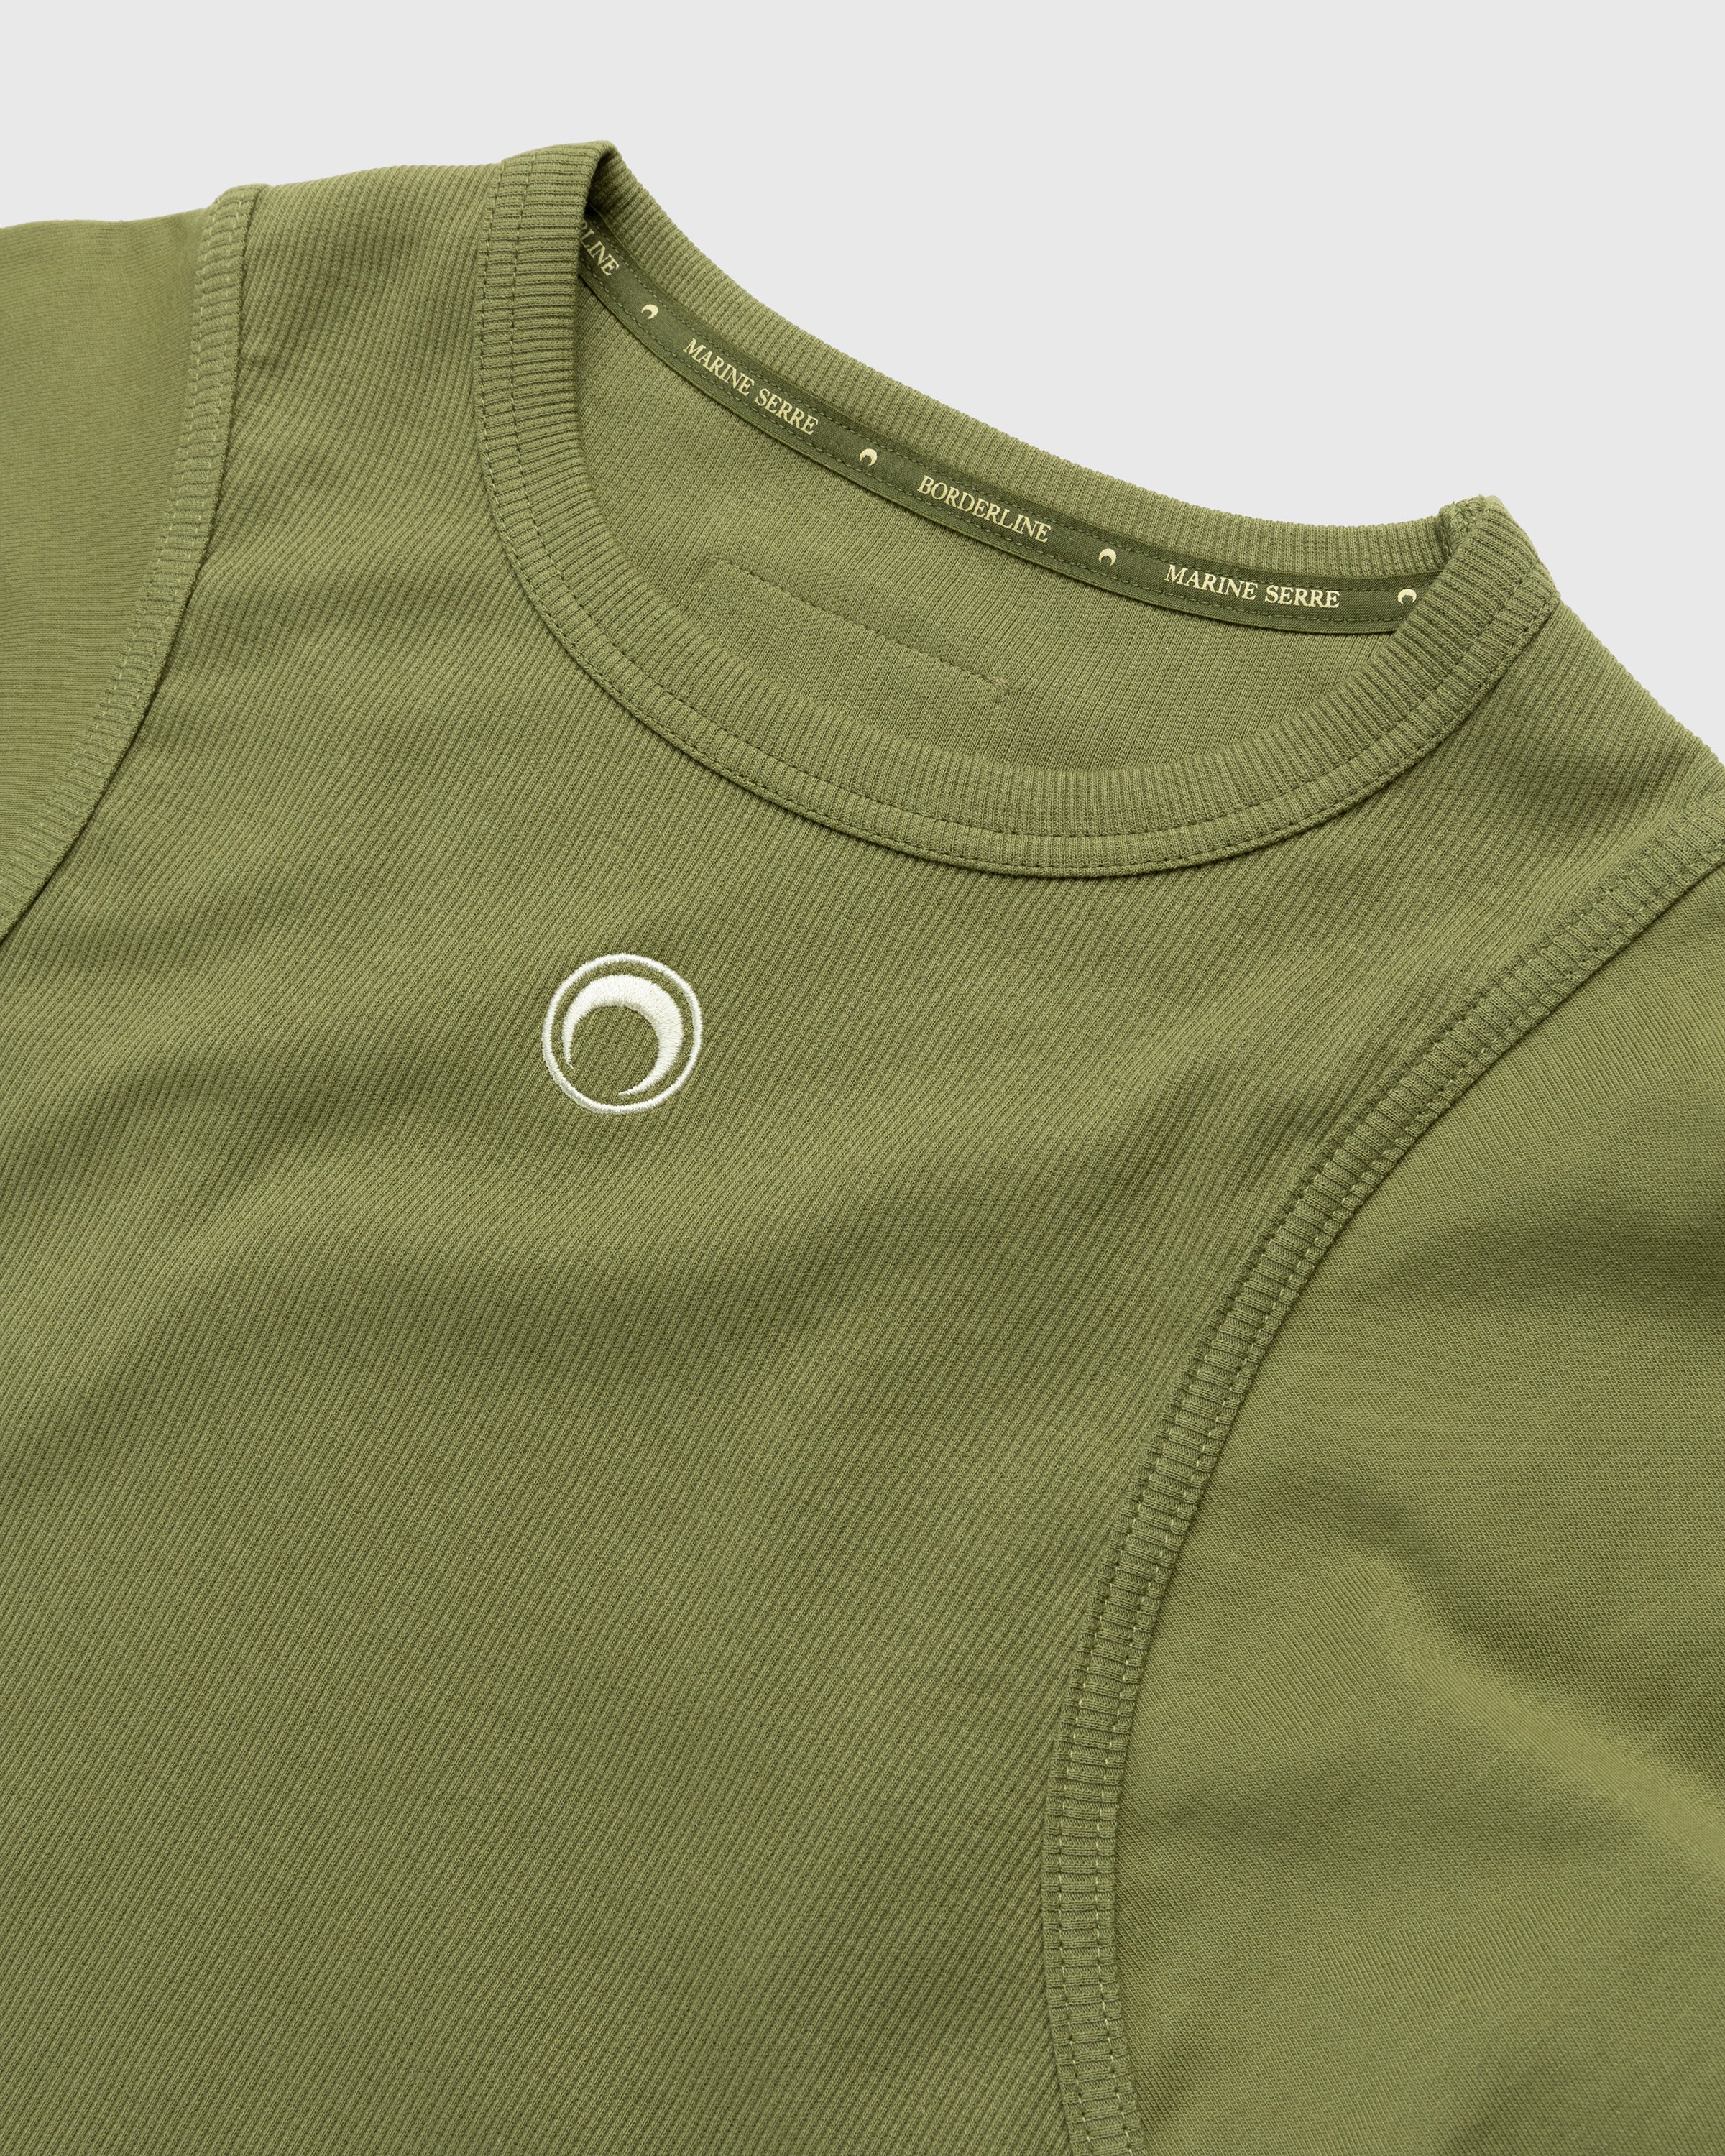 Marine Serre - Organic Cotton Relaxed Long-Sleeve Top Green - Clothing - Green - Image 5